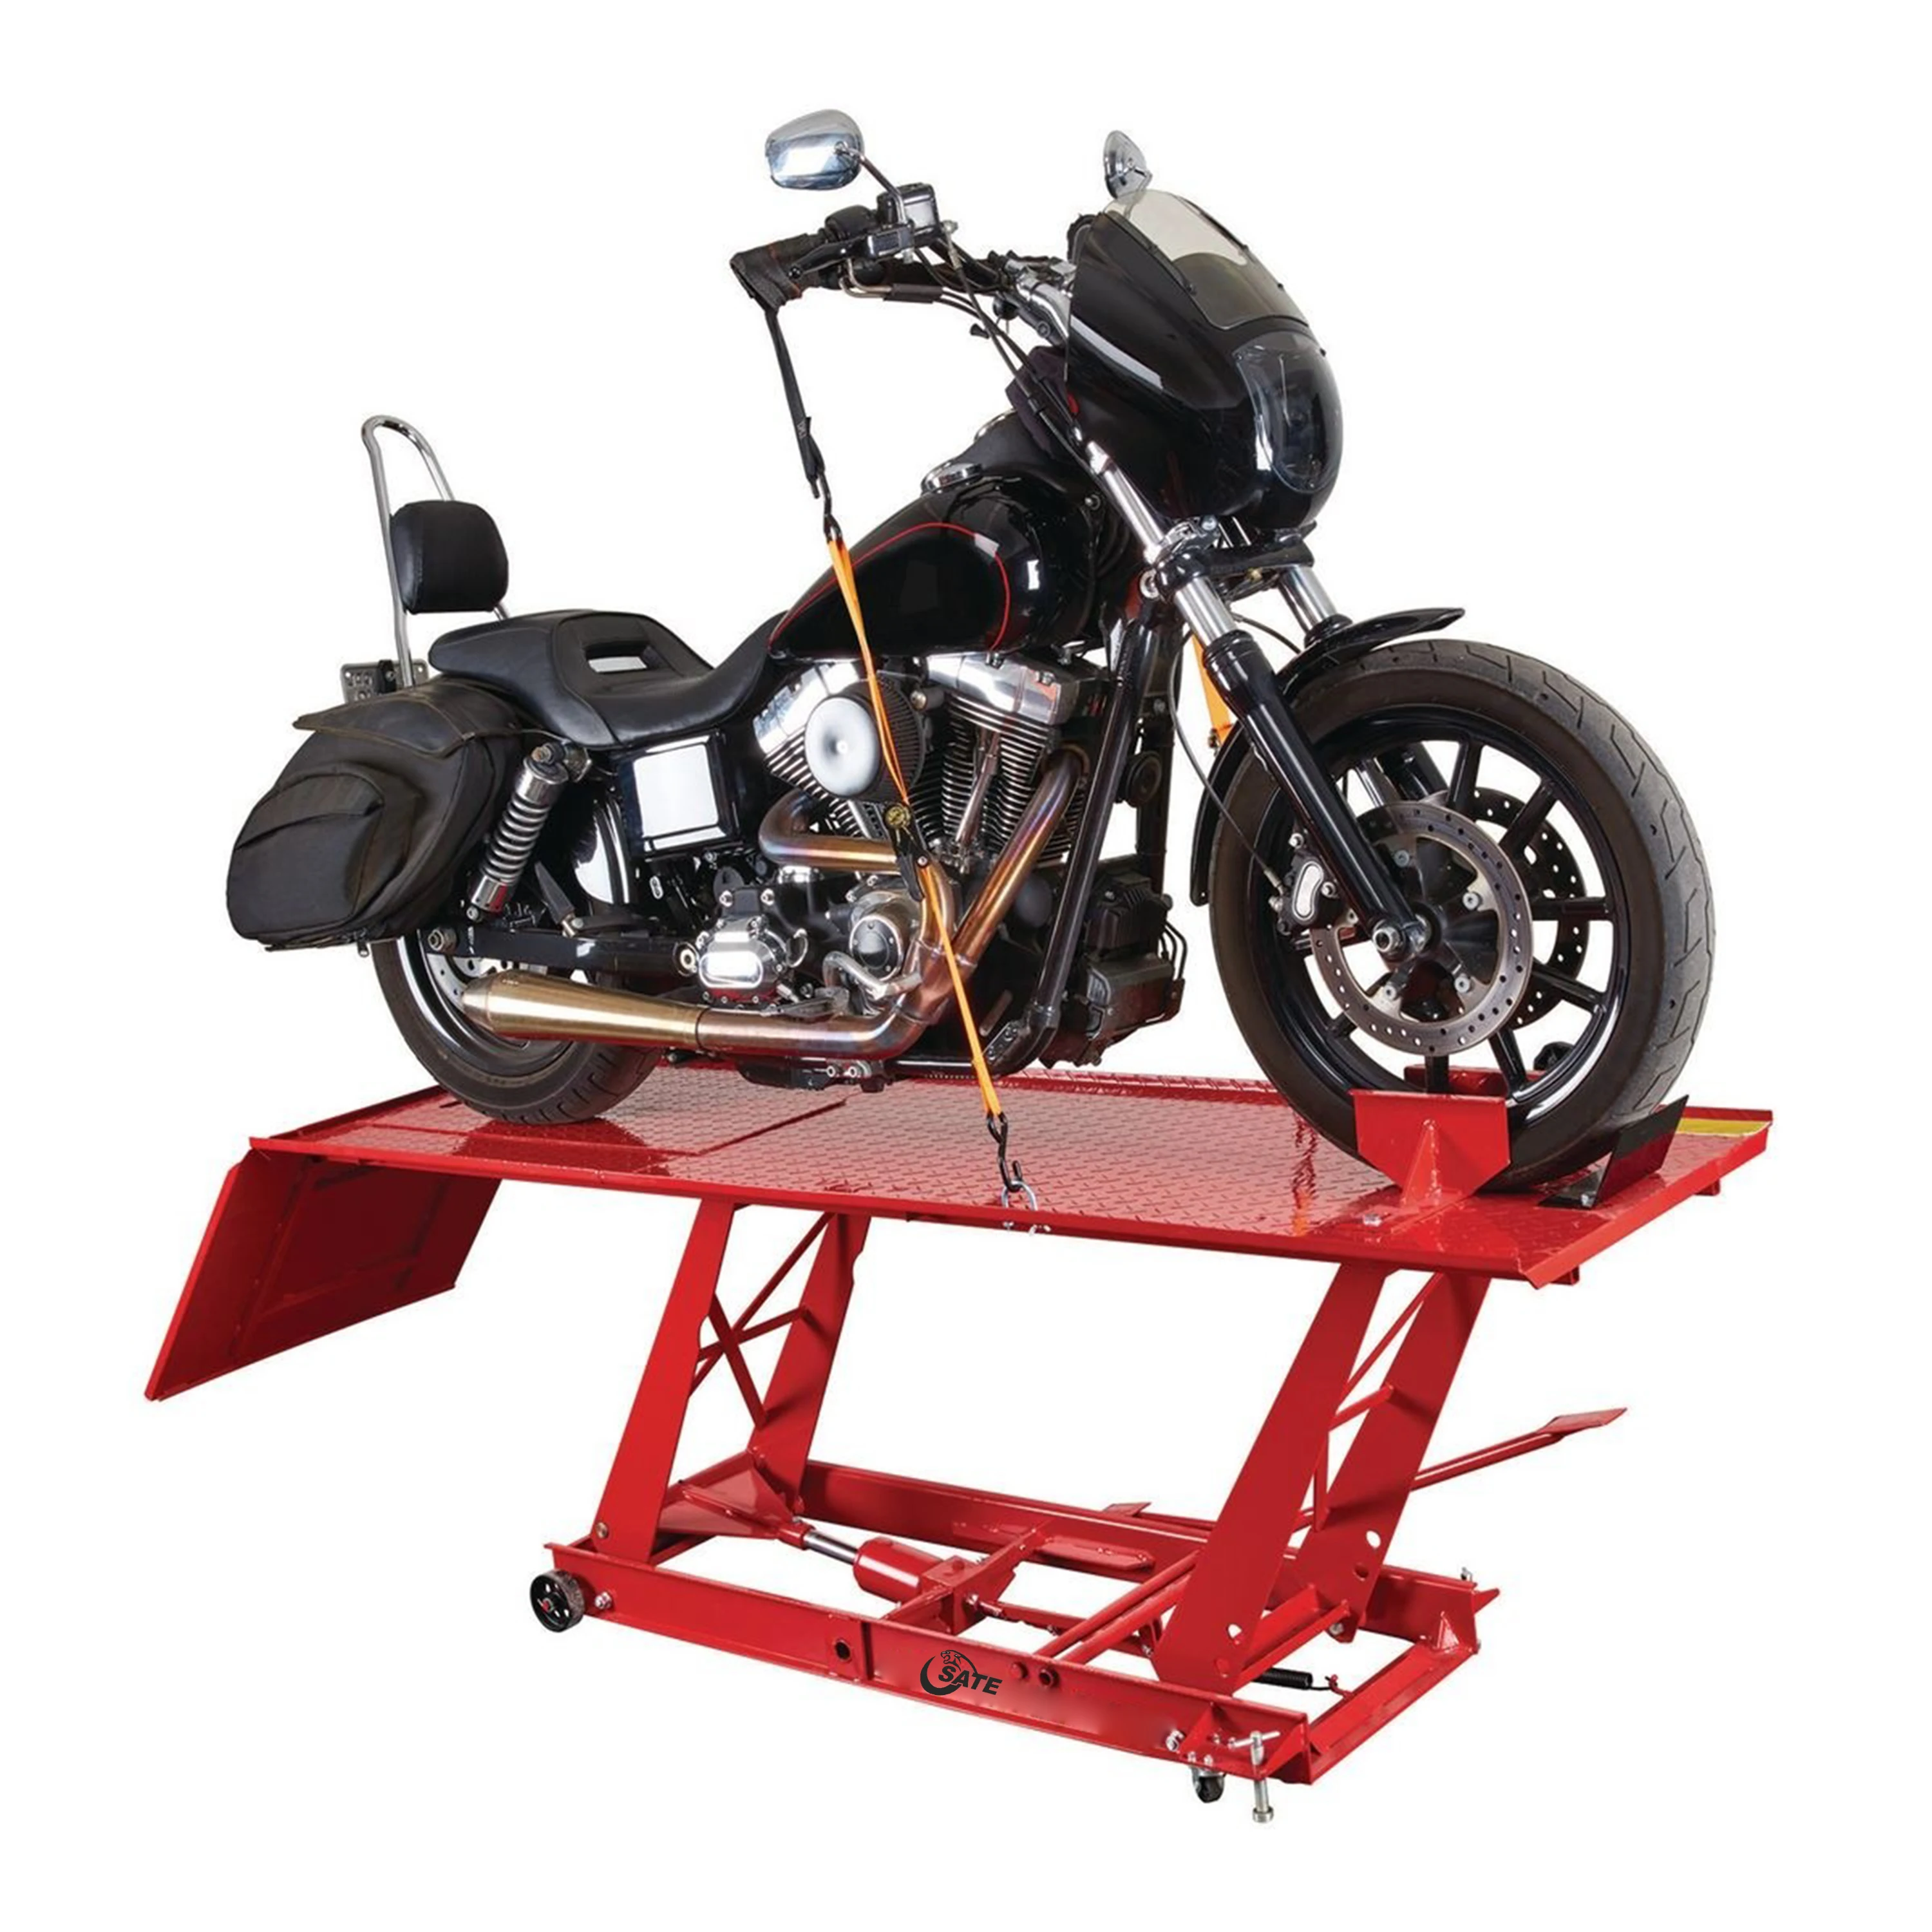 Hotsale Air 1500lbs Hydraulic Motorcycle Lift With Ce Certificate - Buy Motorcycle Lift Table